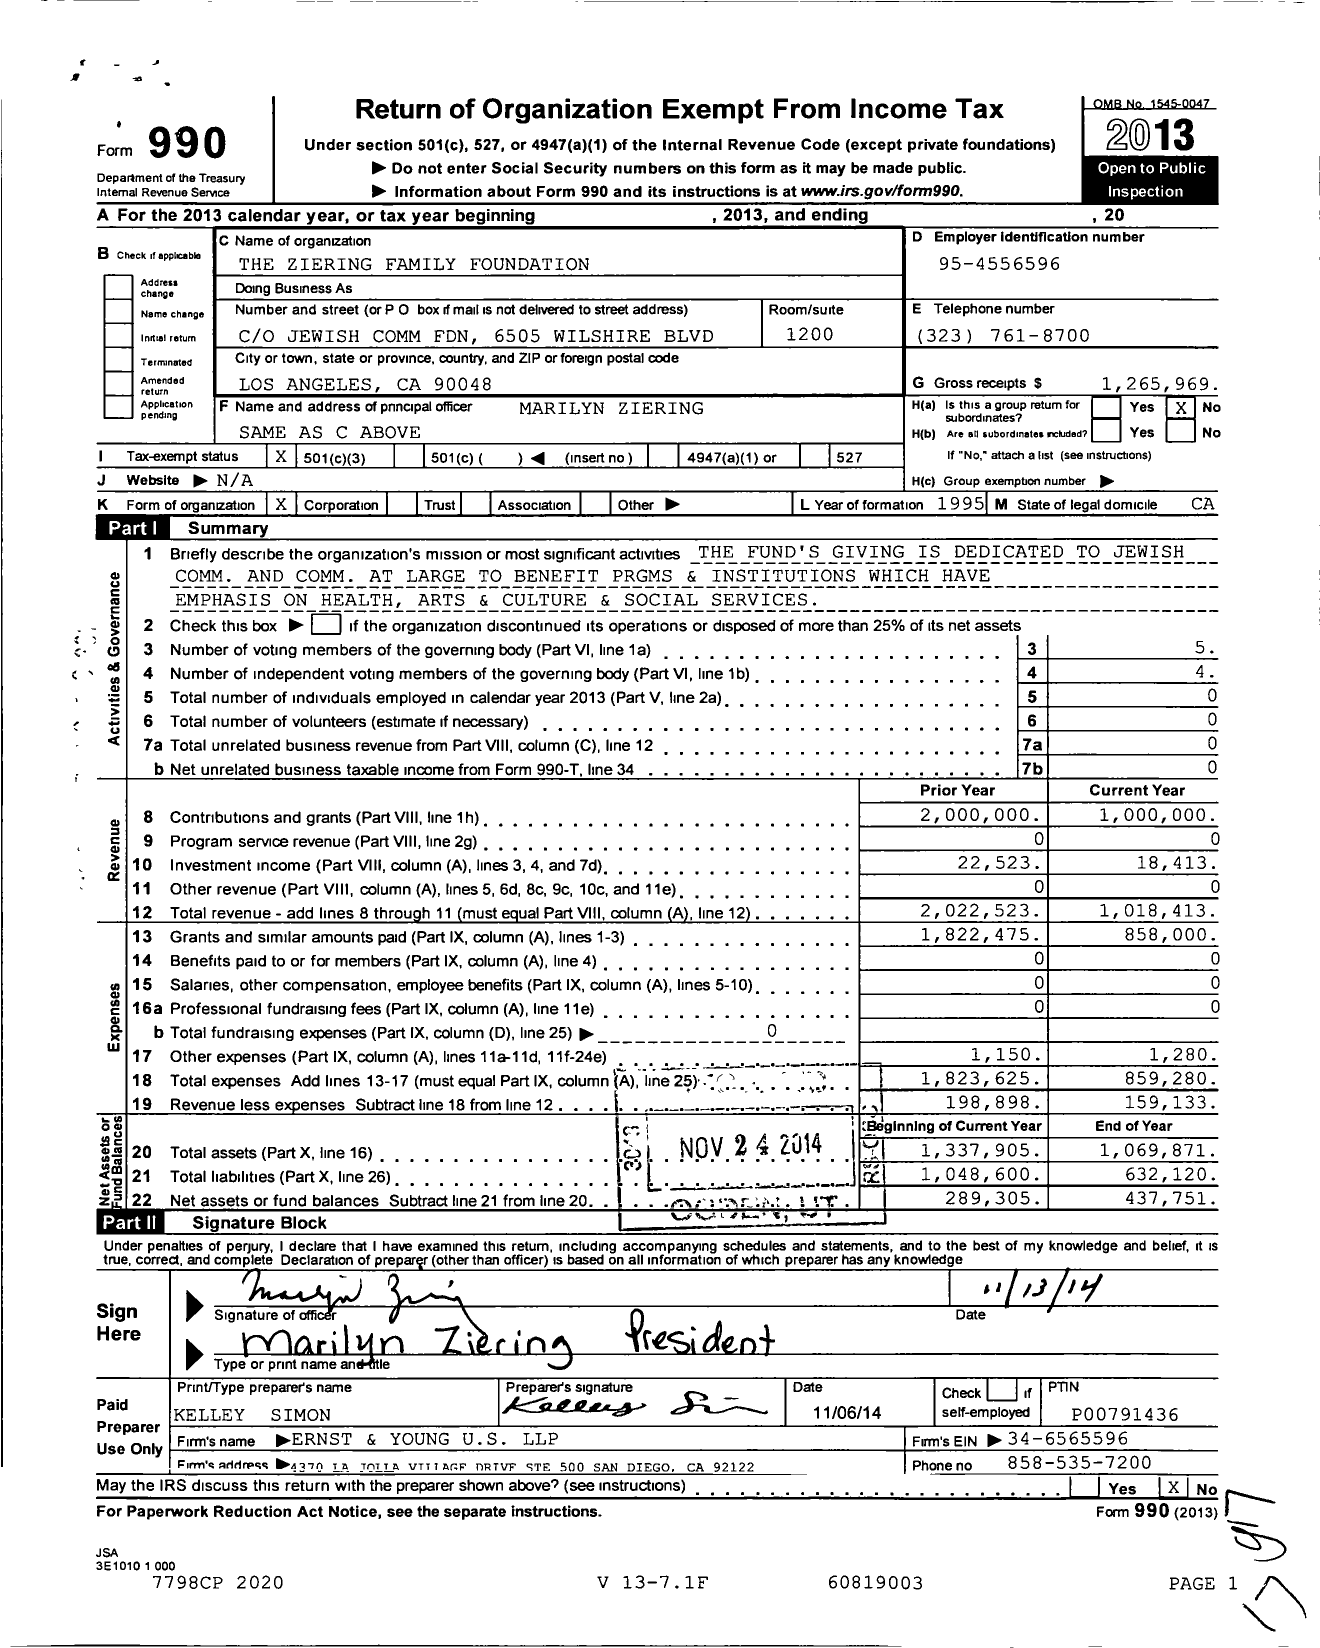 Image of first page of 2013 Form 990 for The Ziering Family Foundation